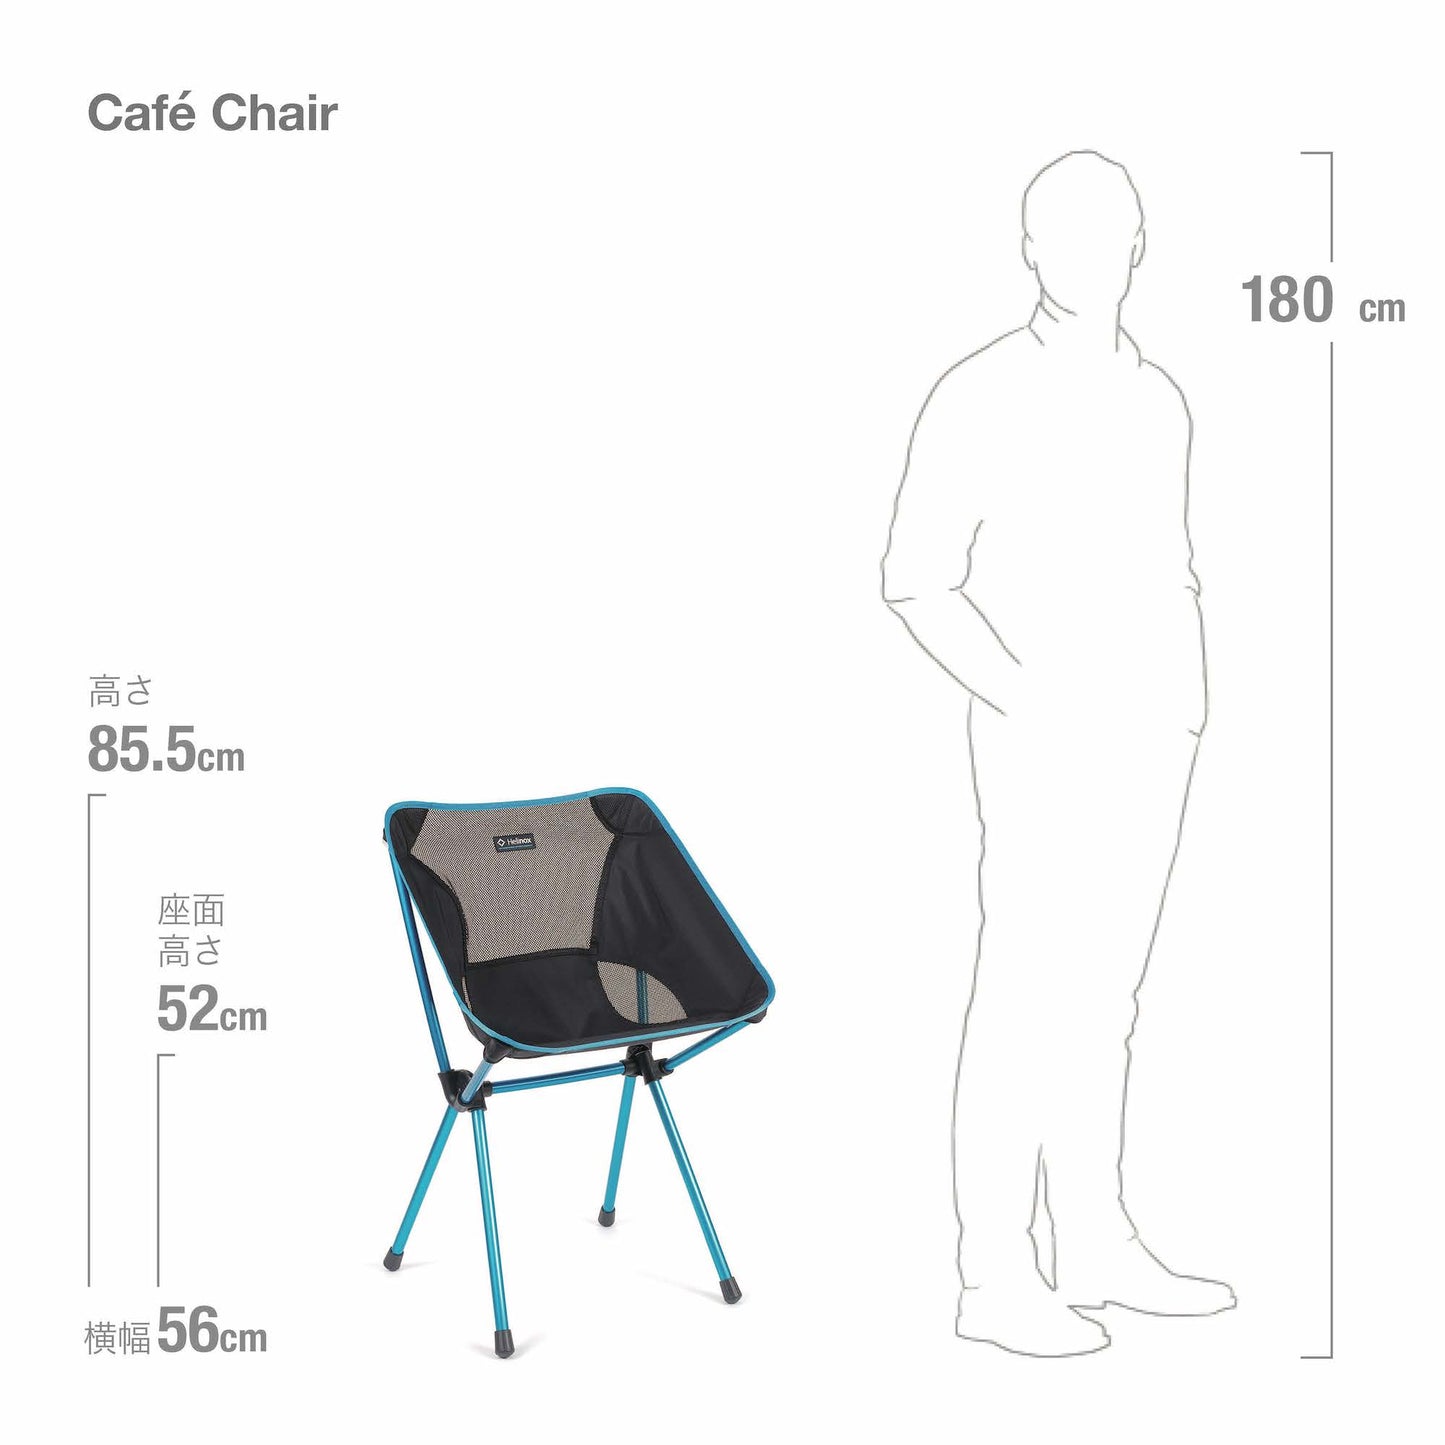 Cafe Chair - Black